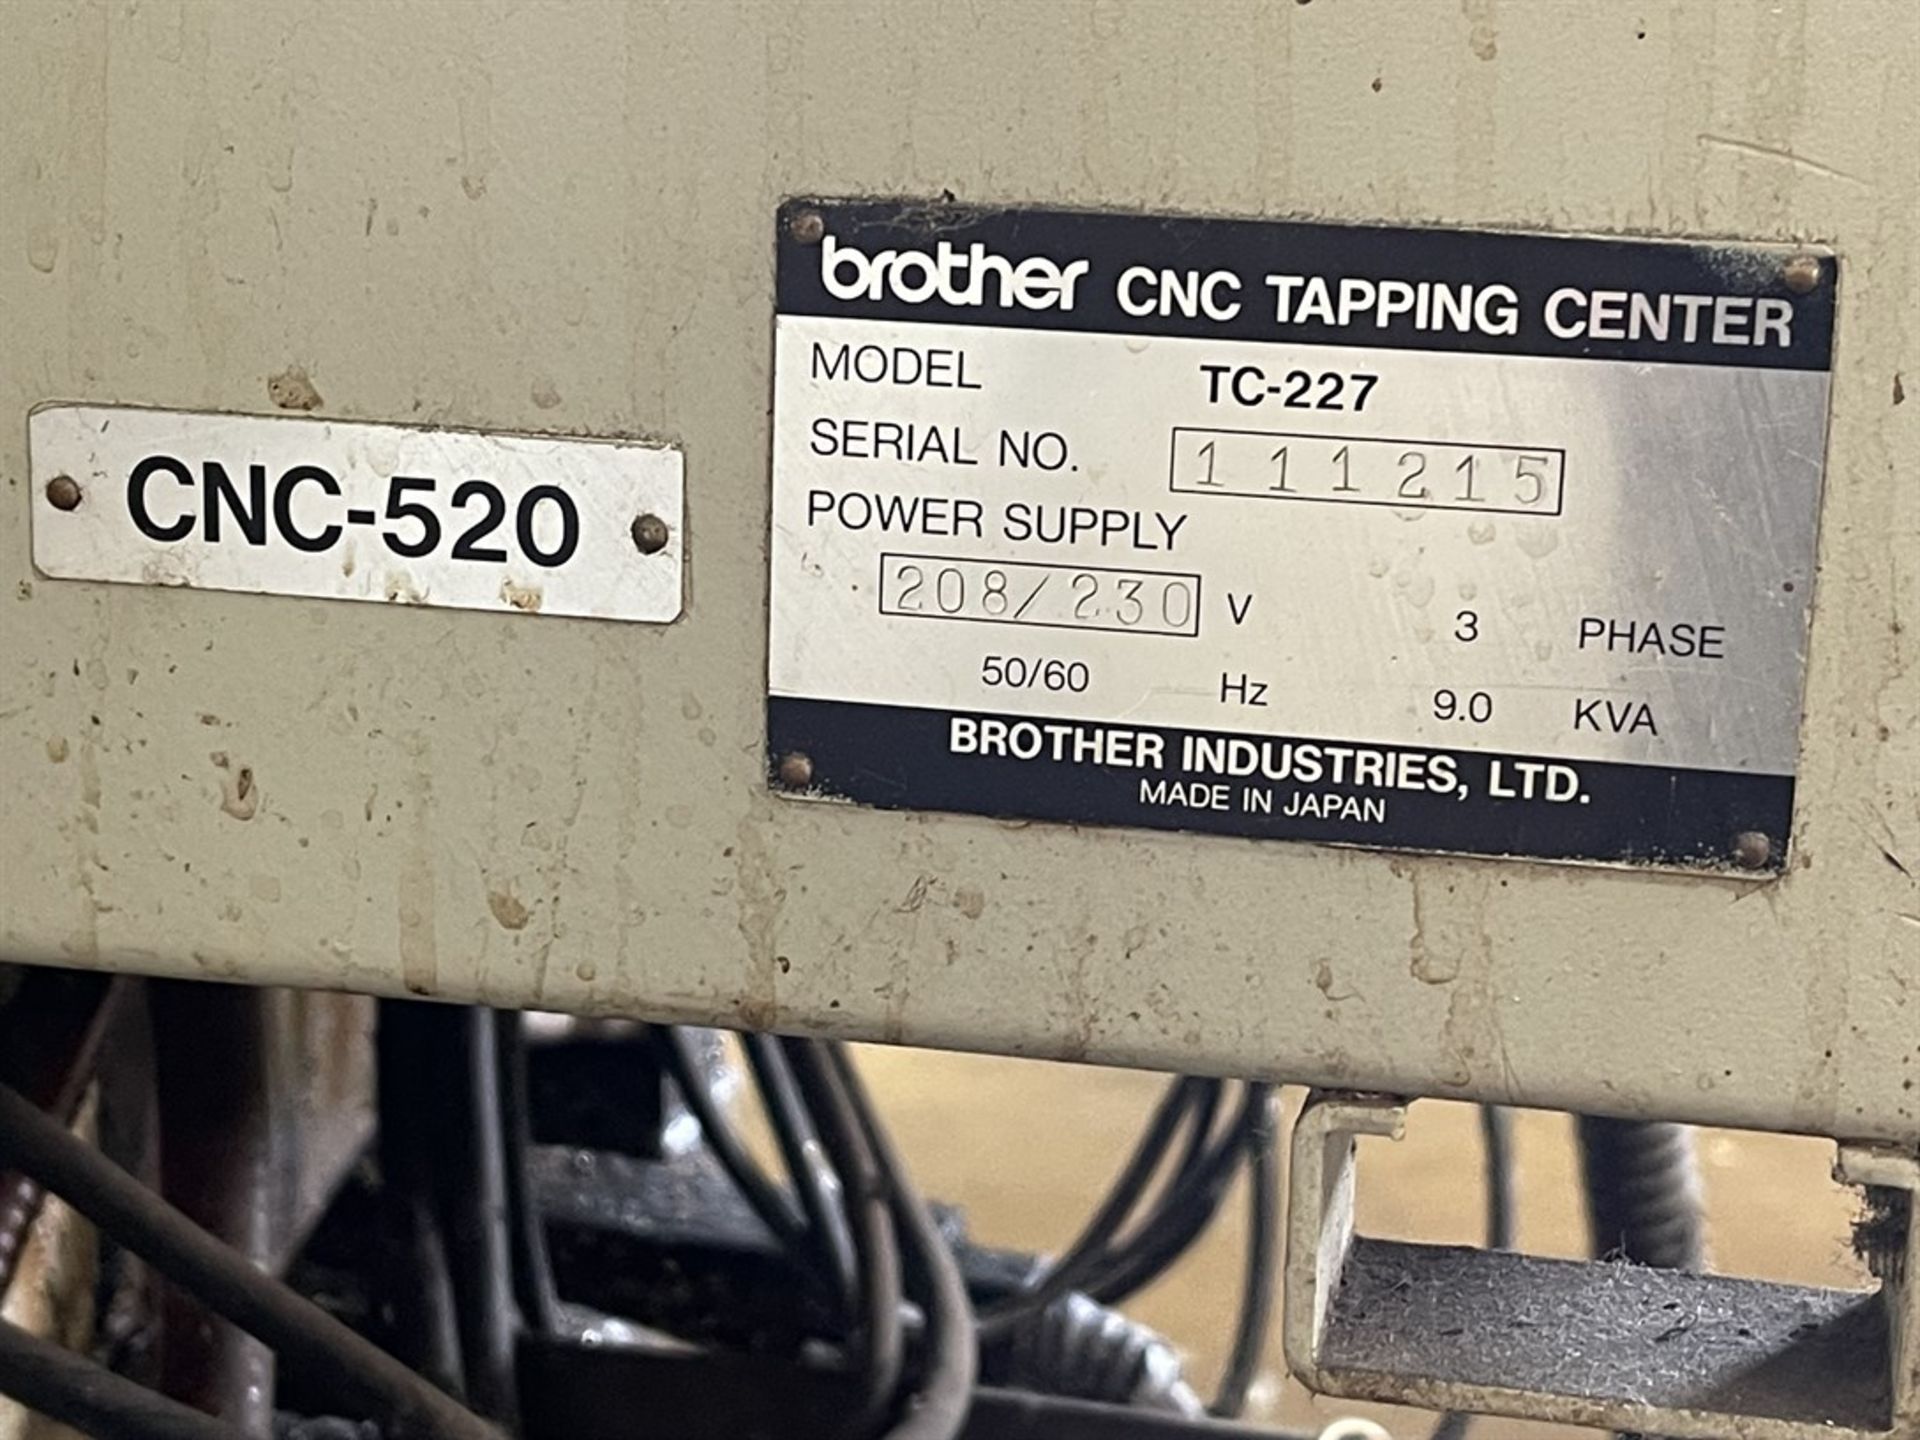 BROTHER TC-227 CNC Drilling & Tapping Center, s/n 111215, CNC 520 Control, 16.5” X, 11.8” Y, 9.8” Z, - Image 7 of 7